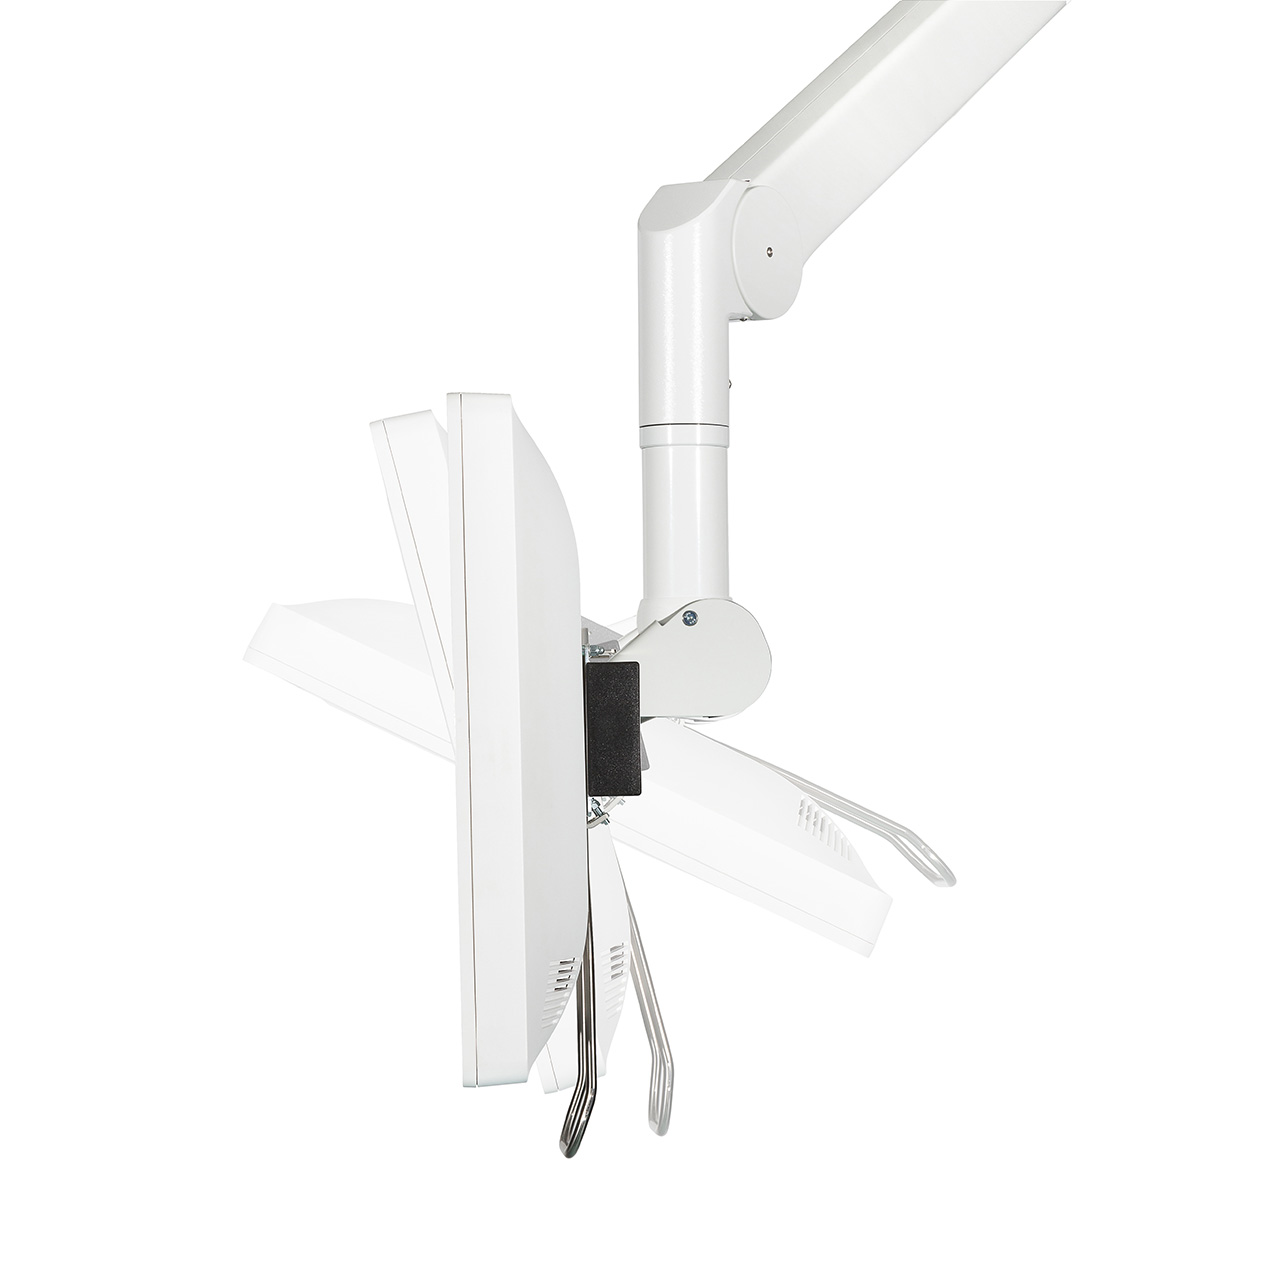 Tilt and adjust the Getinge flat screens vertically or horizontally to best meet the positioning requirements of each surgical procedure, whether the surgeon is seated or standing.